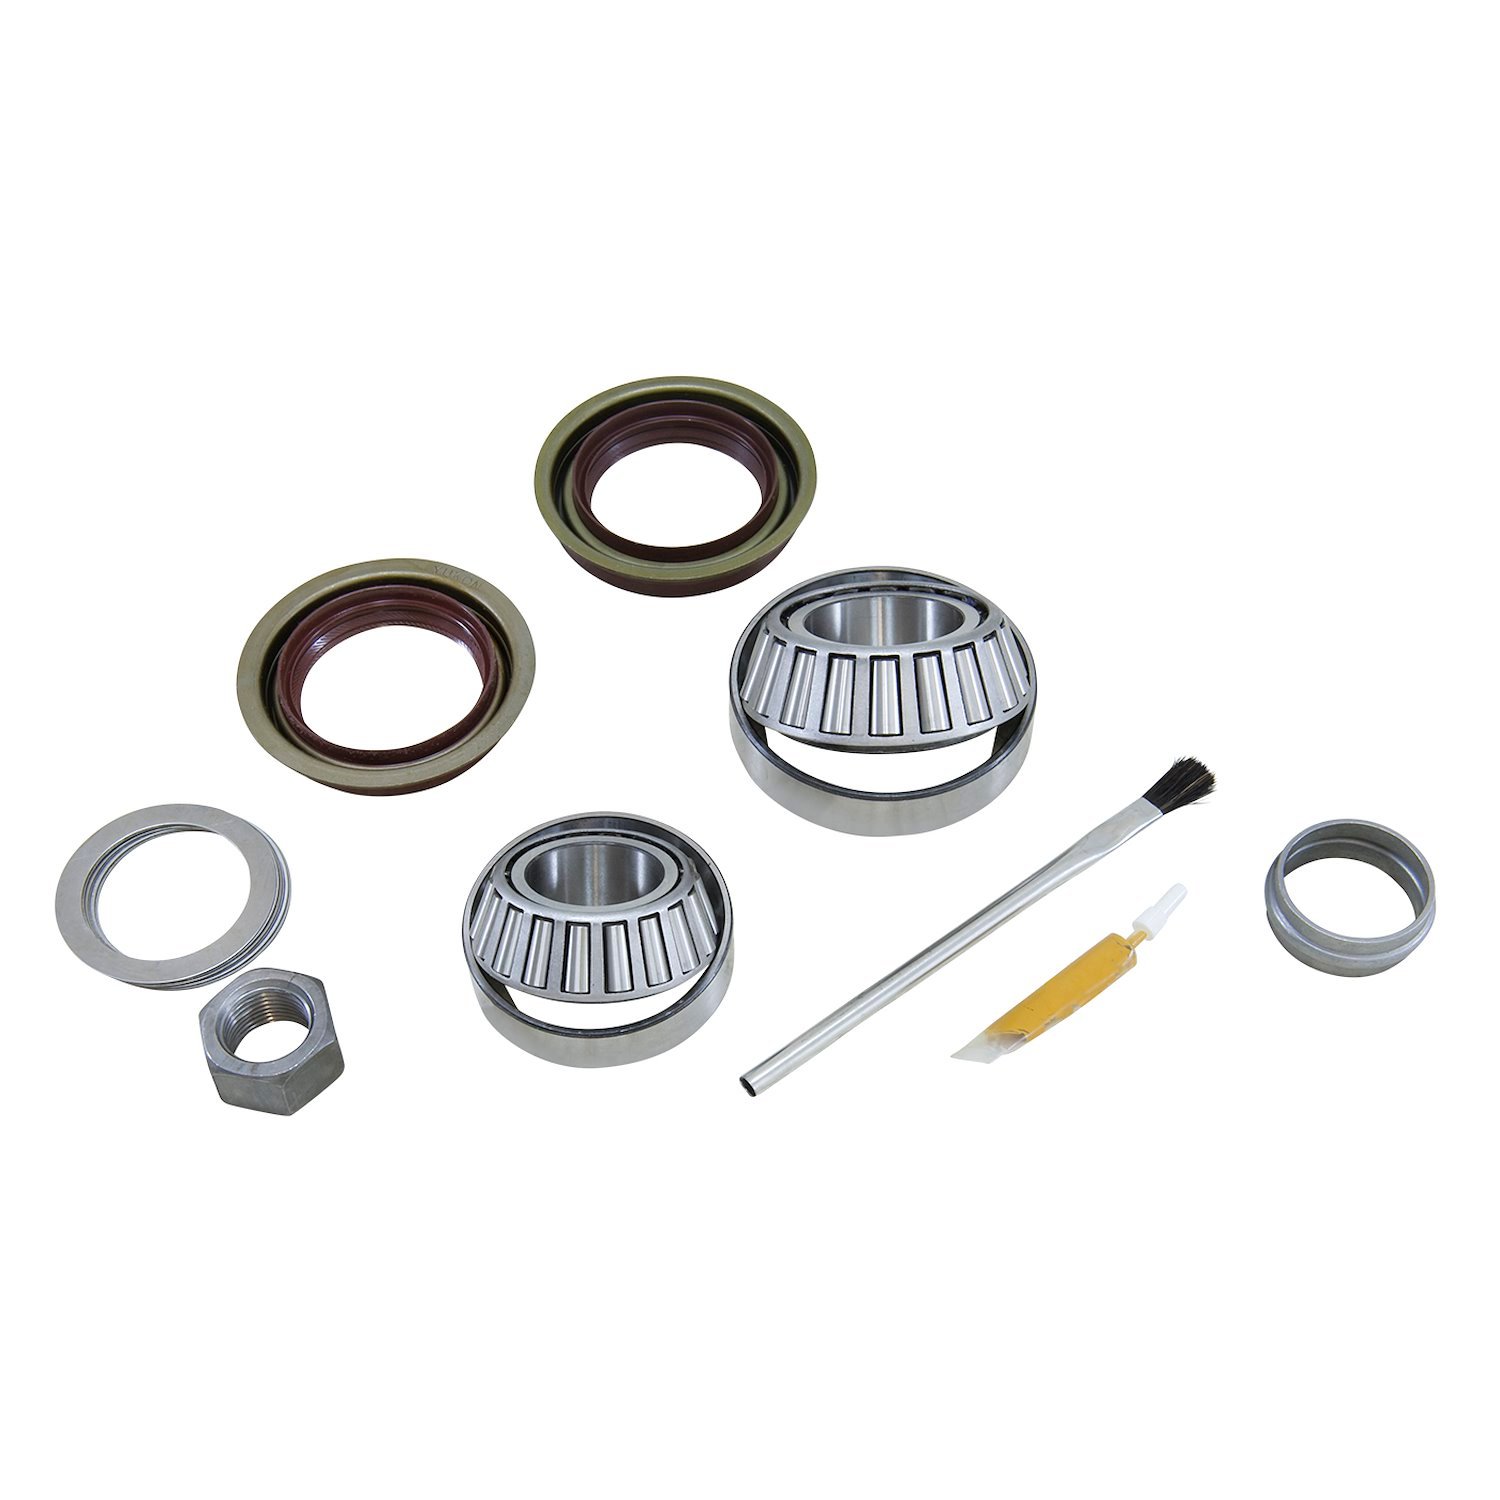 USA Standard ZPKGM7.5C Pinion Installation Kit, For '00 & Up GM 7.5 in. & 7.625